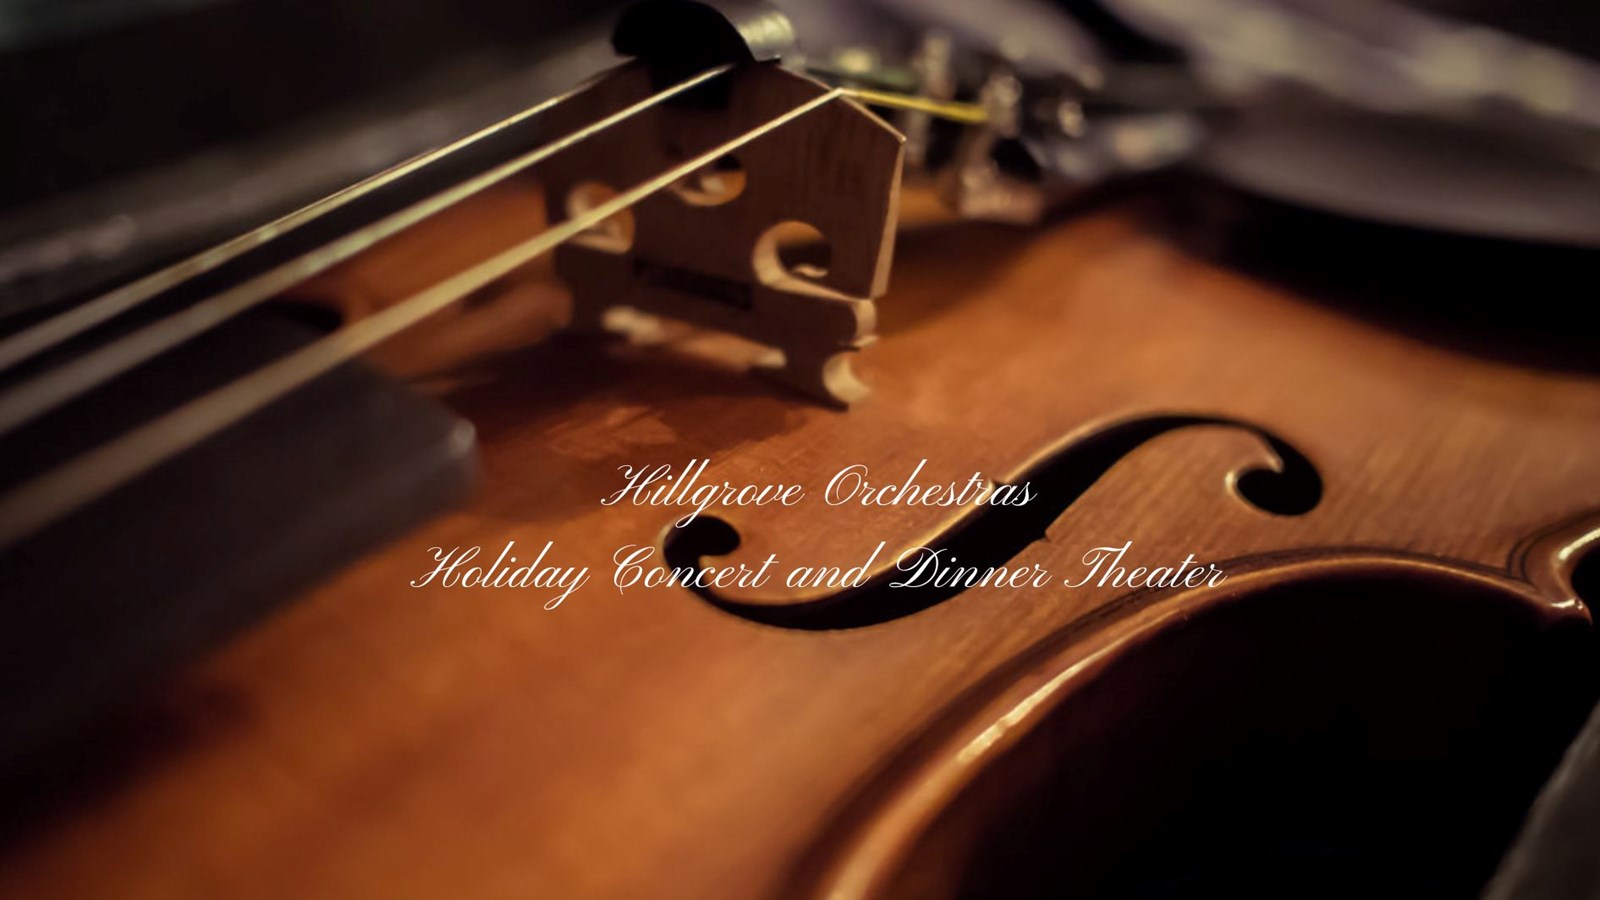 Hillgrove Orchestras Holiday Concert and Dinner Theater